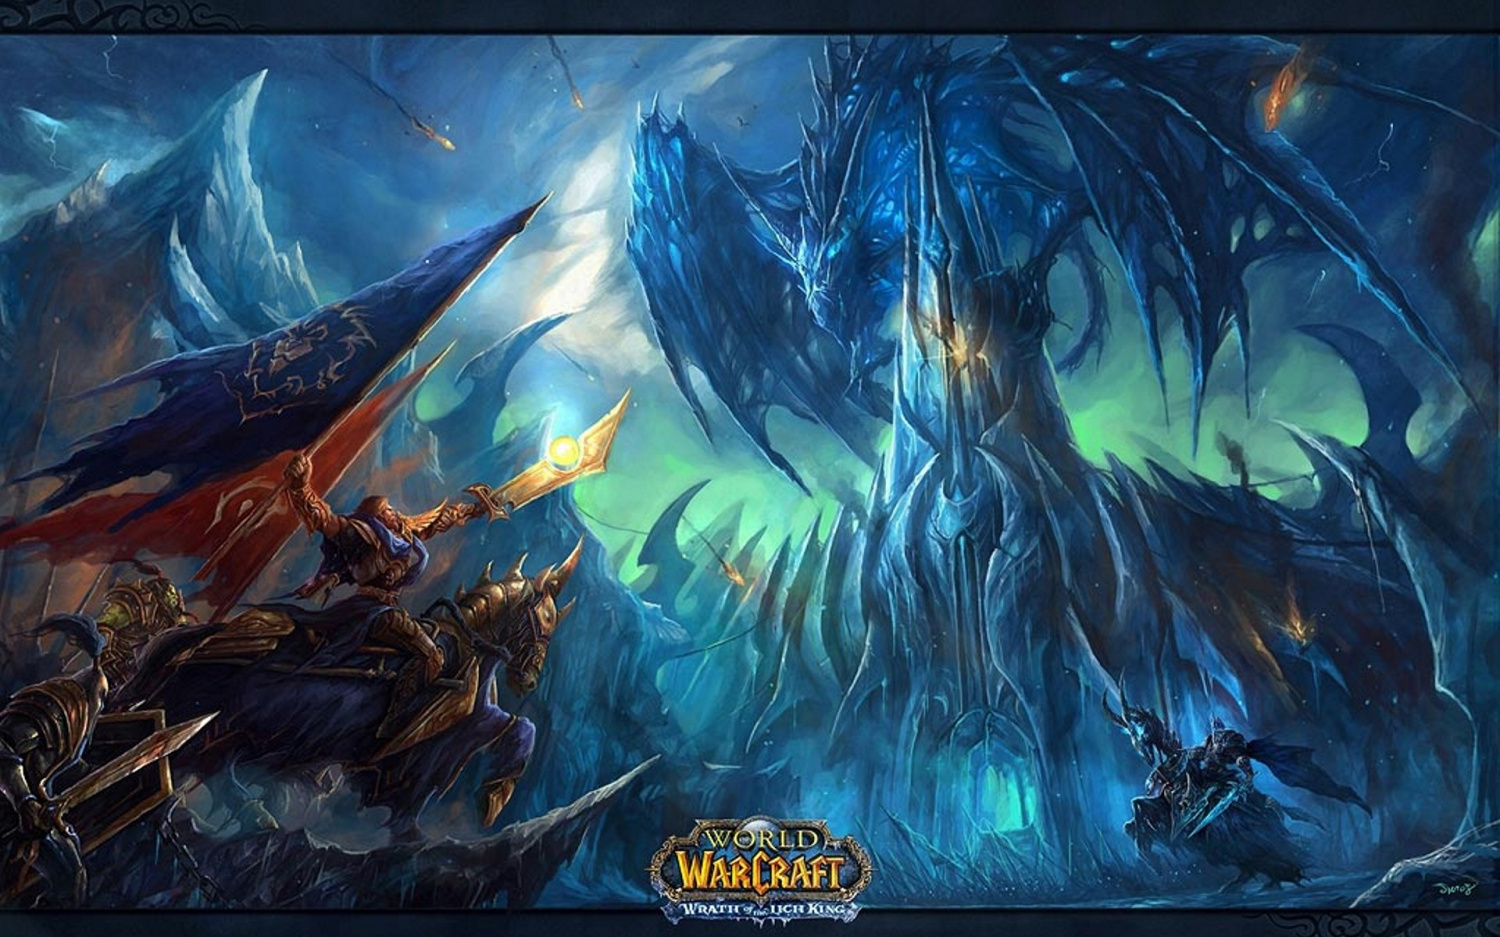 ‘World of Warcraft’ Anniversary Event Brings Back Popular Bosses; How